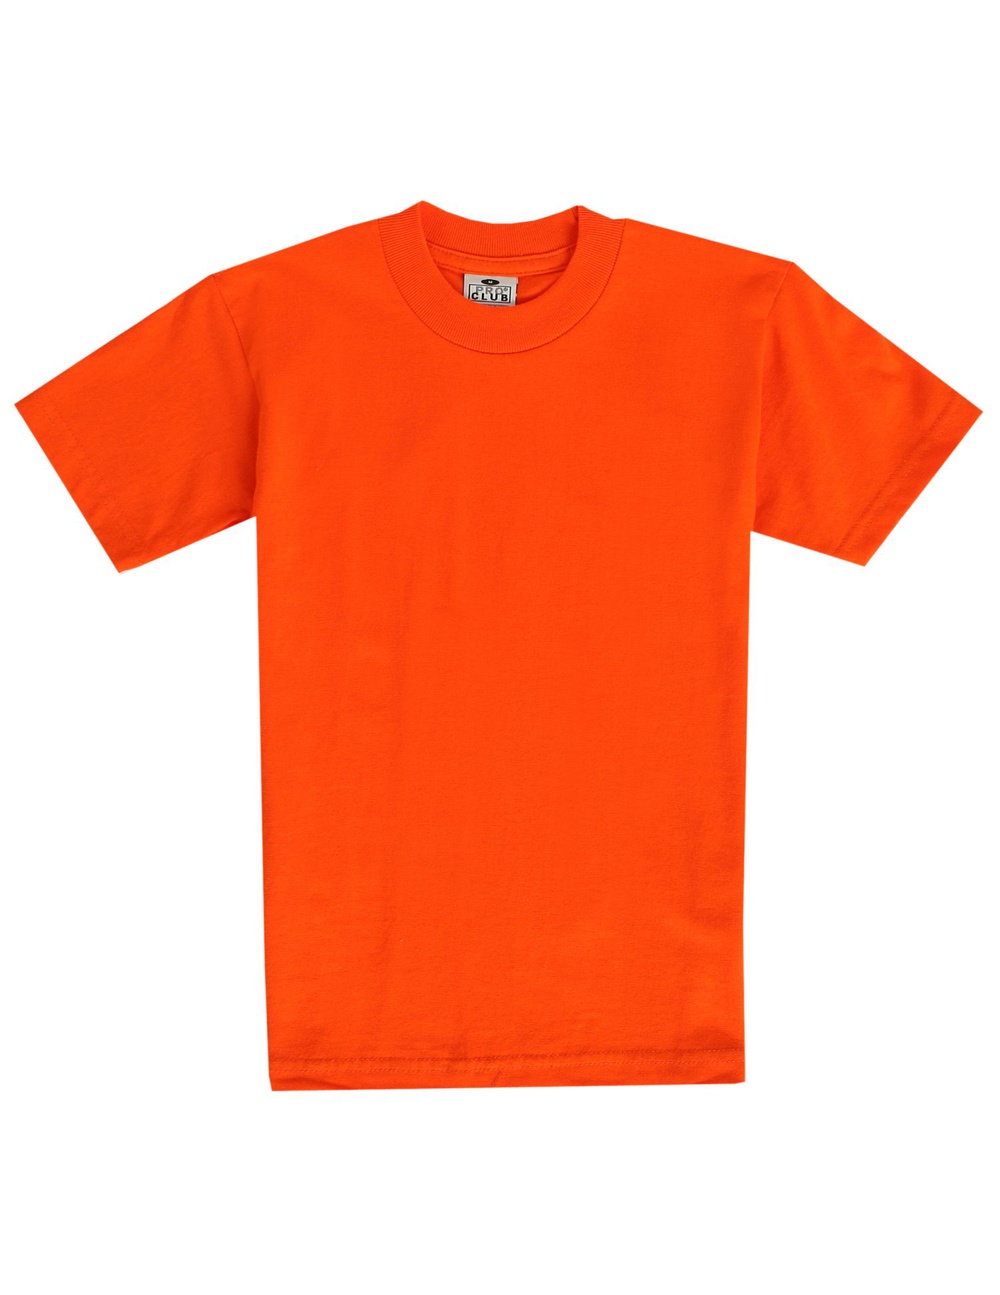 203 ROYAL Pro Club Toddler Short Sleeve Crew Neck Tee - Youth